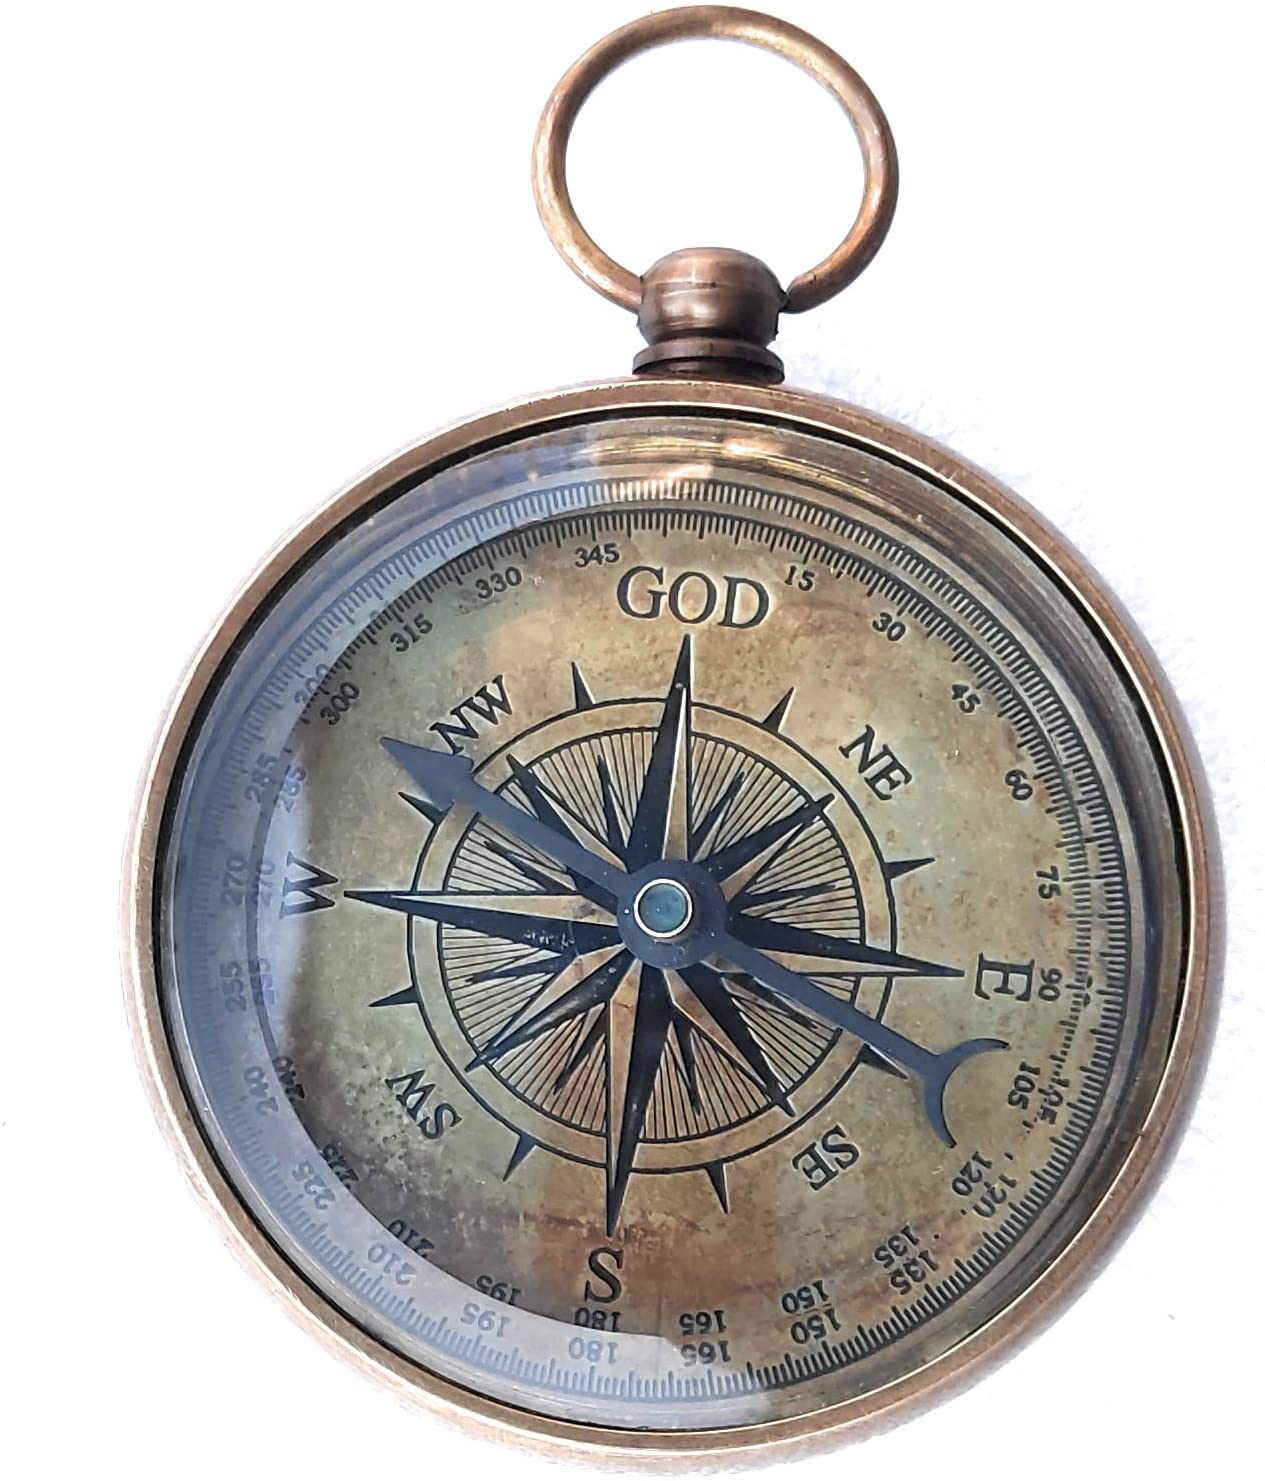 God Guide Me Brass Compass Religious Gift of Faith Catholic Christian Gifts